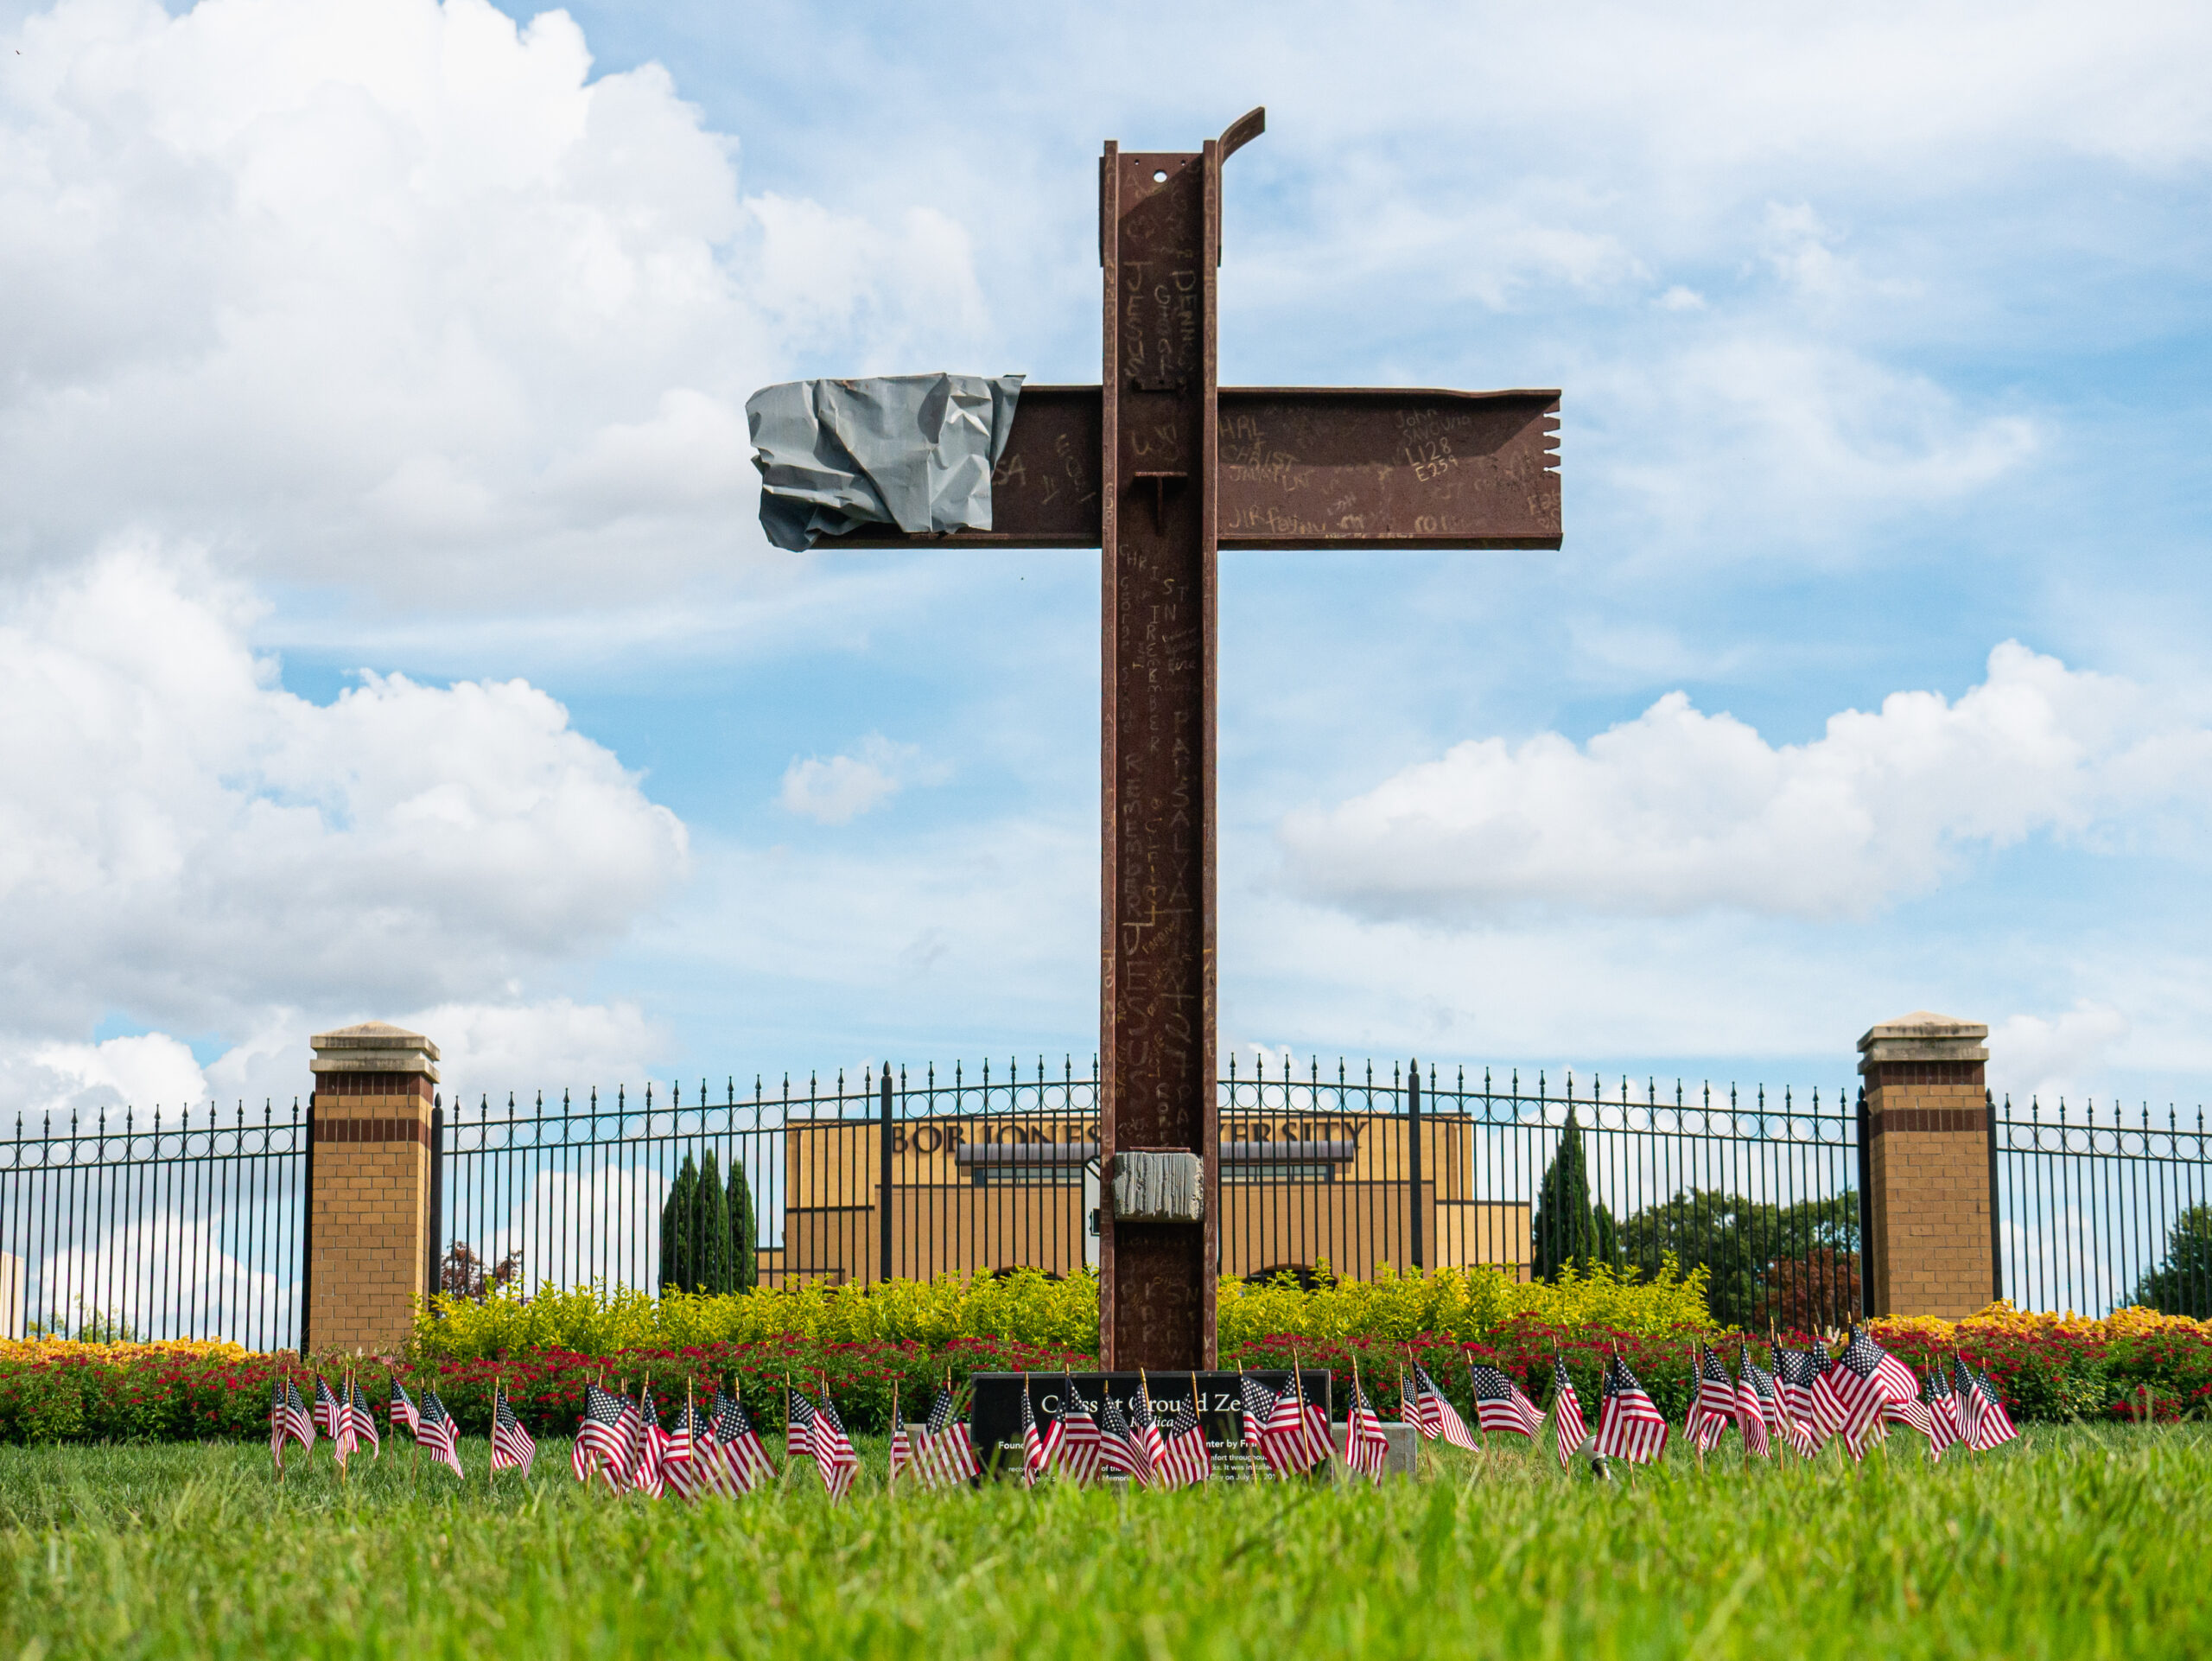 BJU constructed a replica of hte cross at the 9/11 memorial